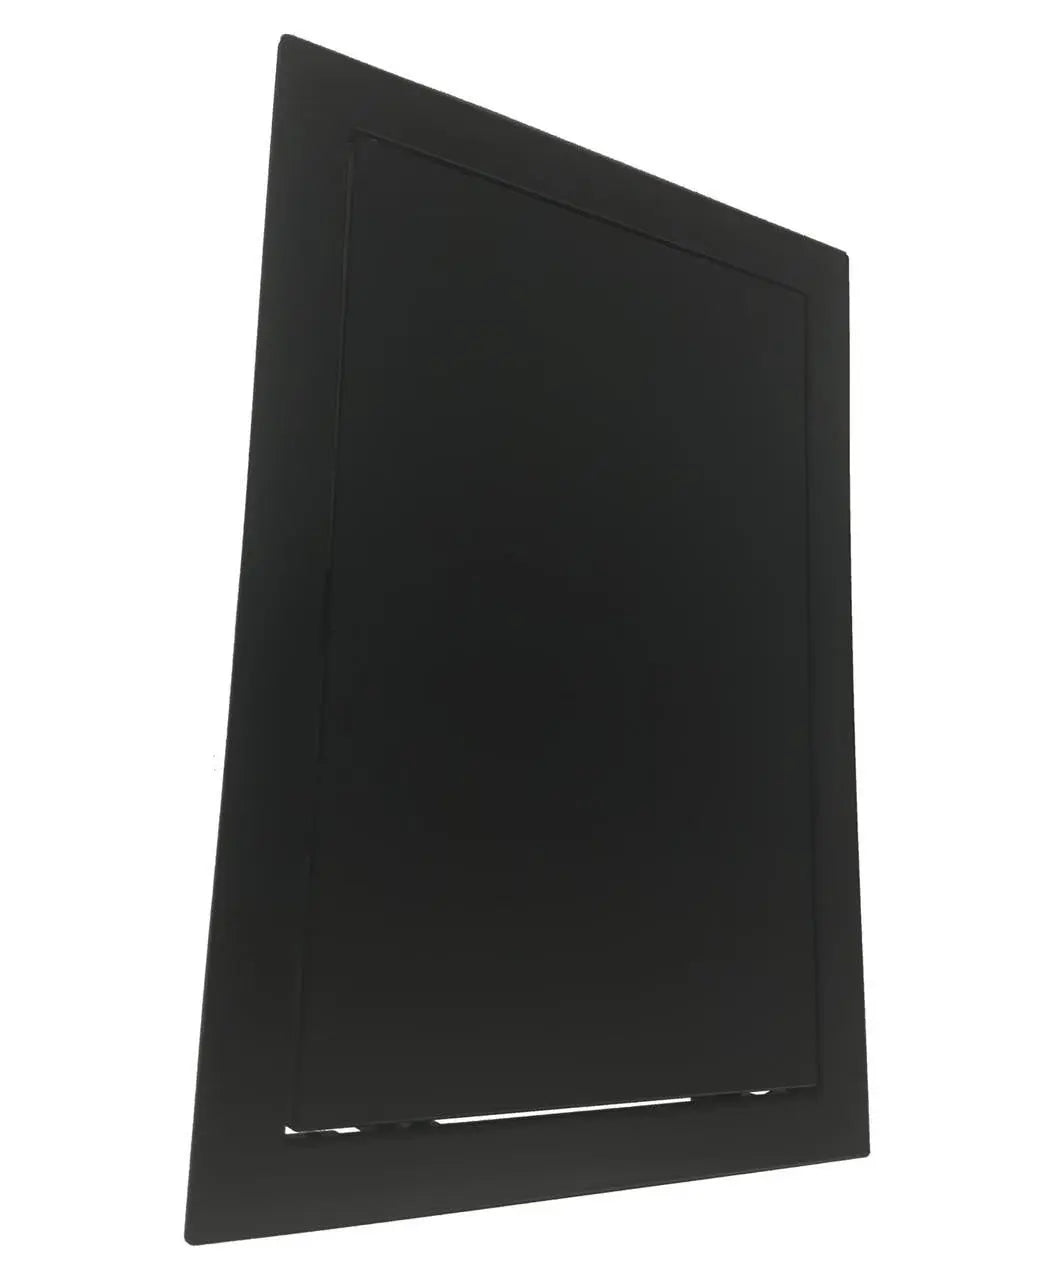 Inspection Access Panel Black Plastic Wall Hatch Check Door Inspection Access Panels